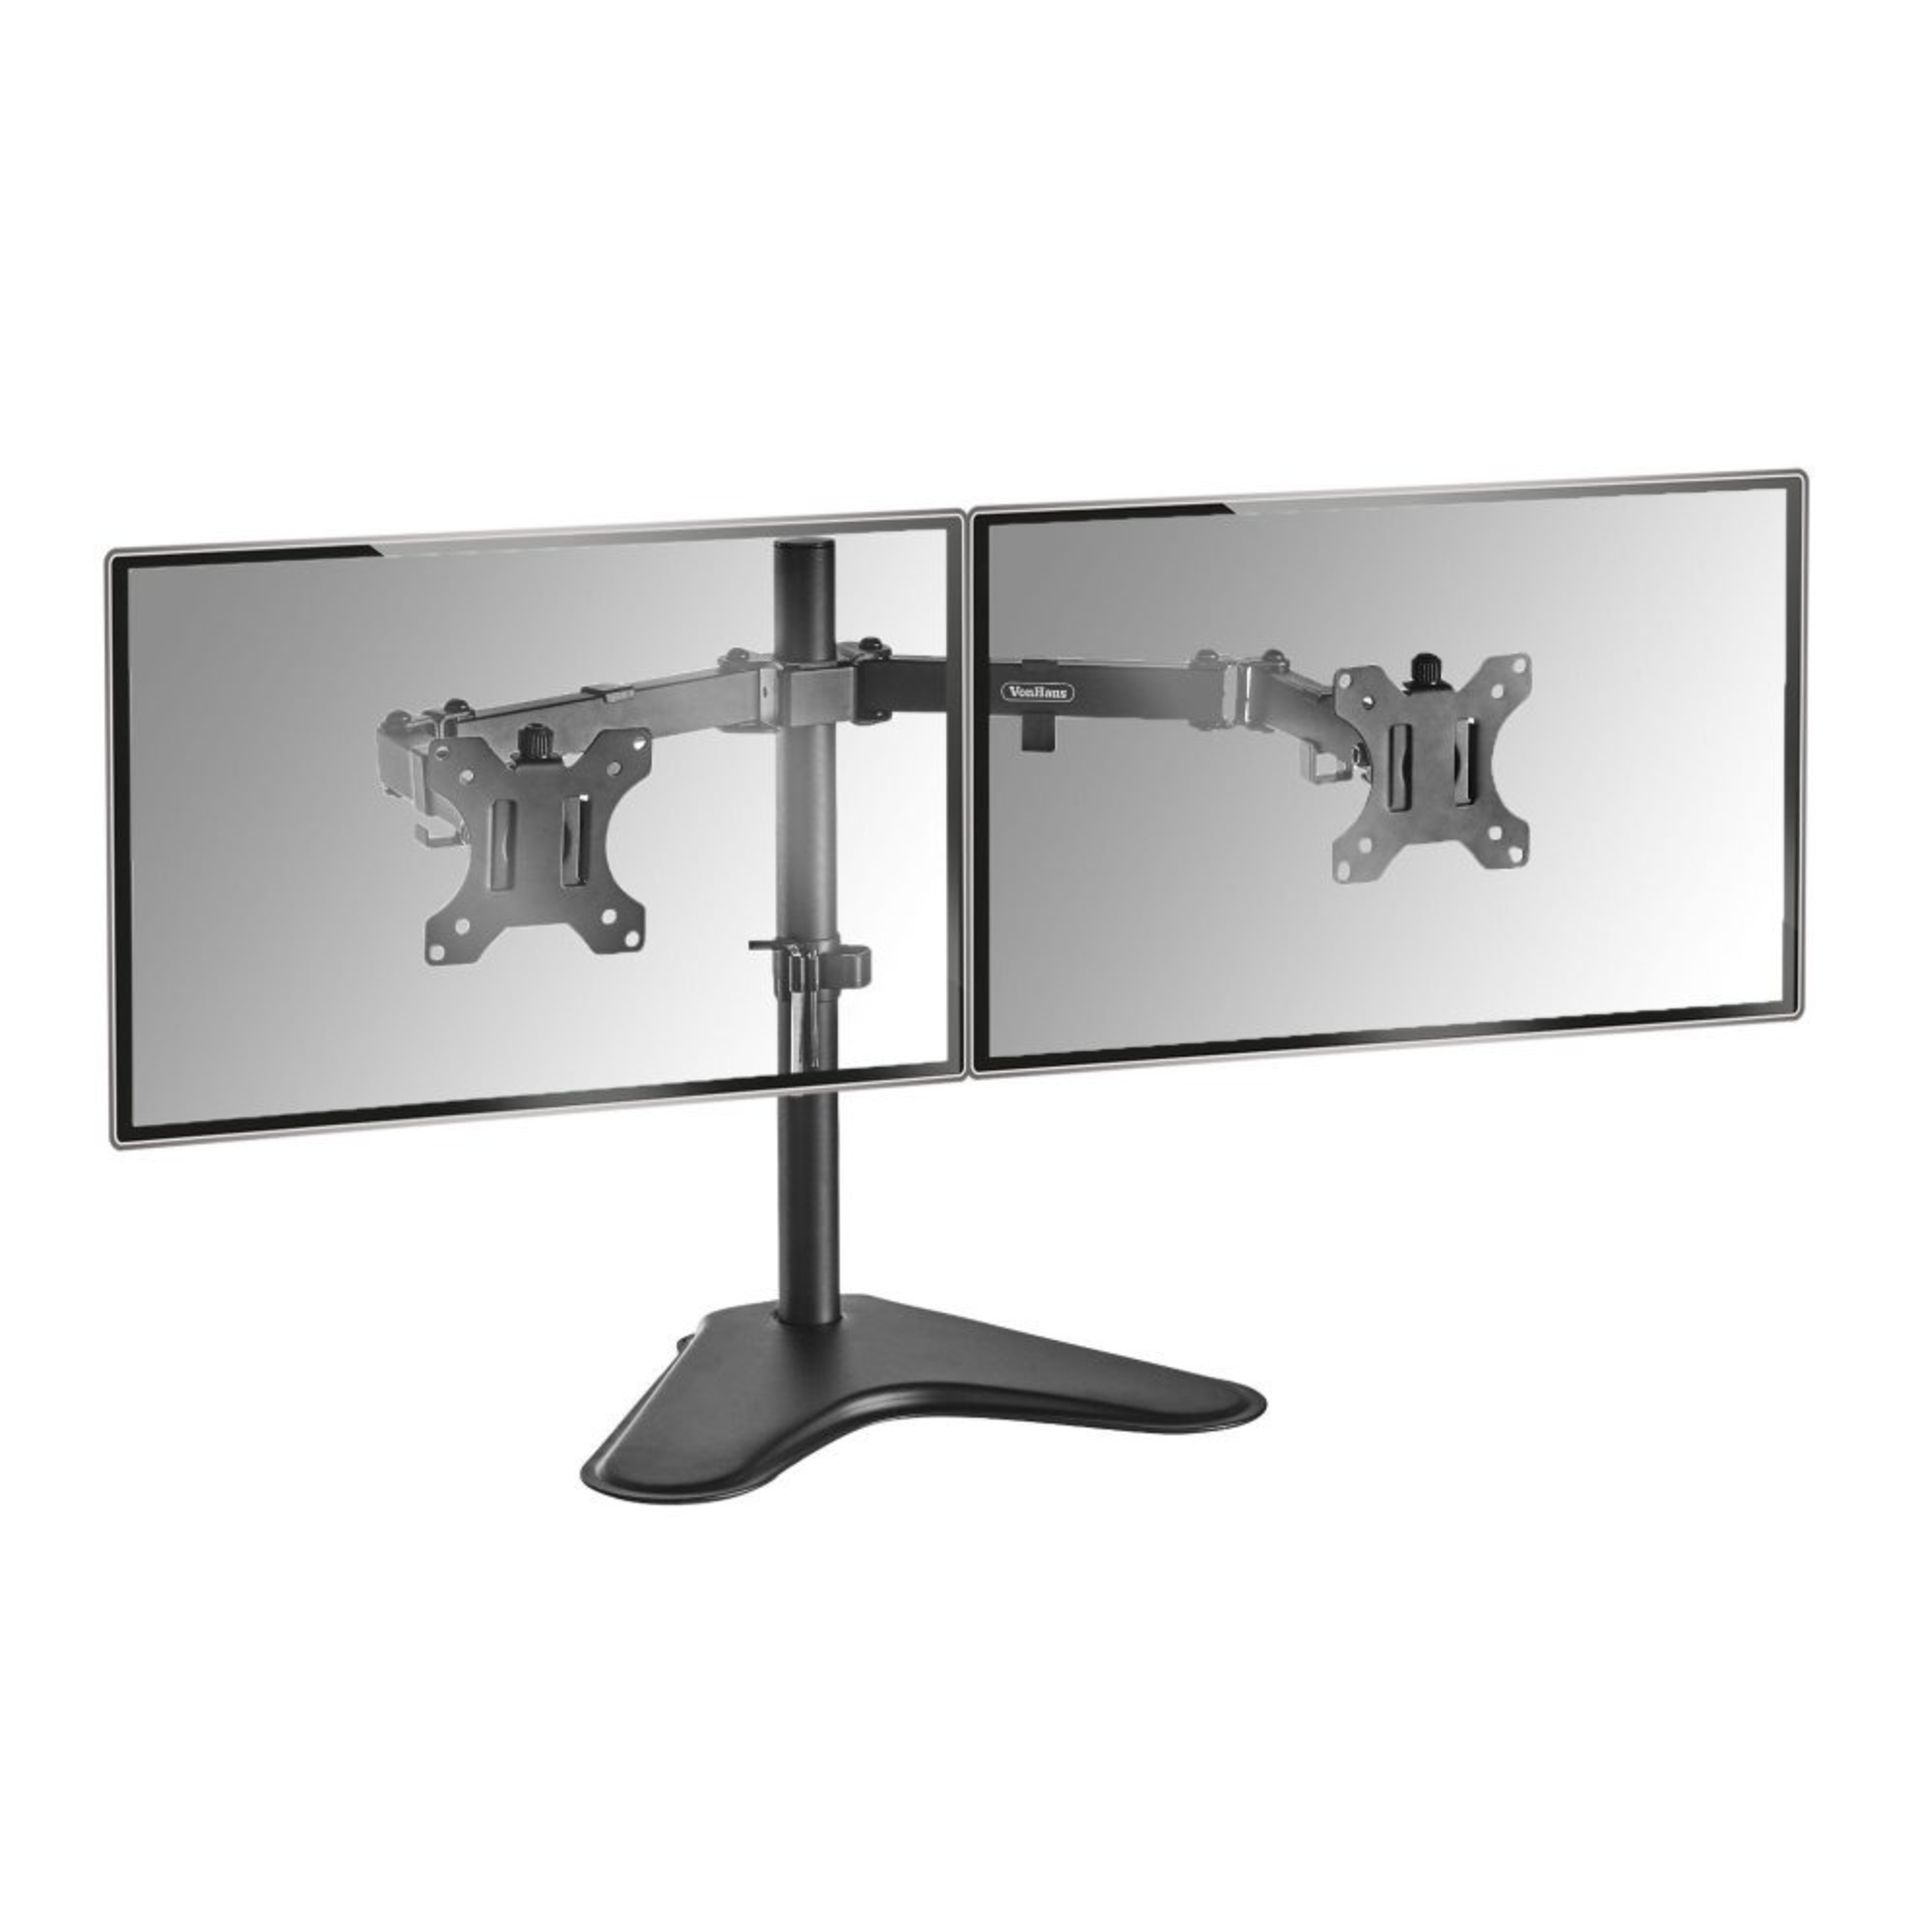 Dual Arm Desk Mount with Stand - ER36